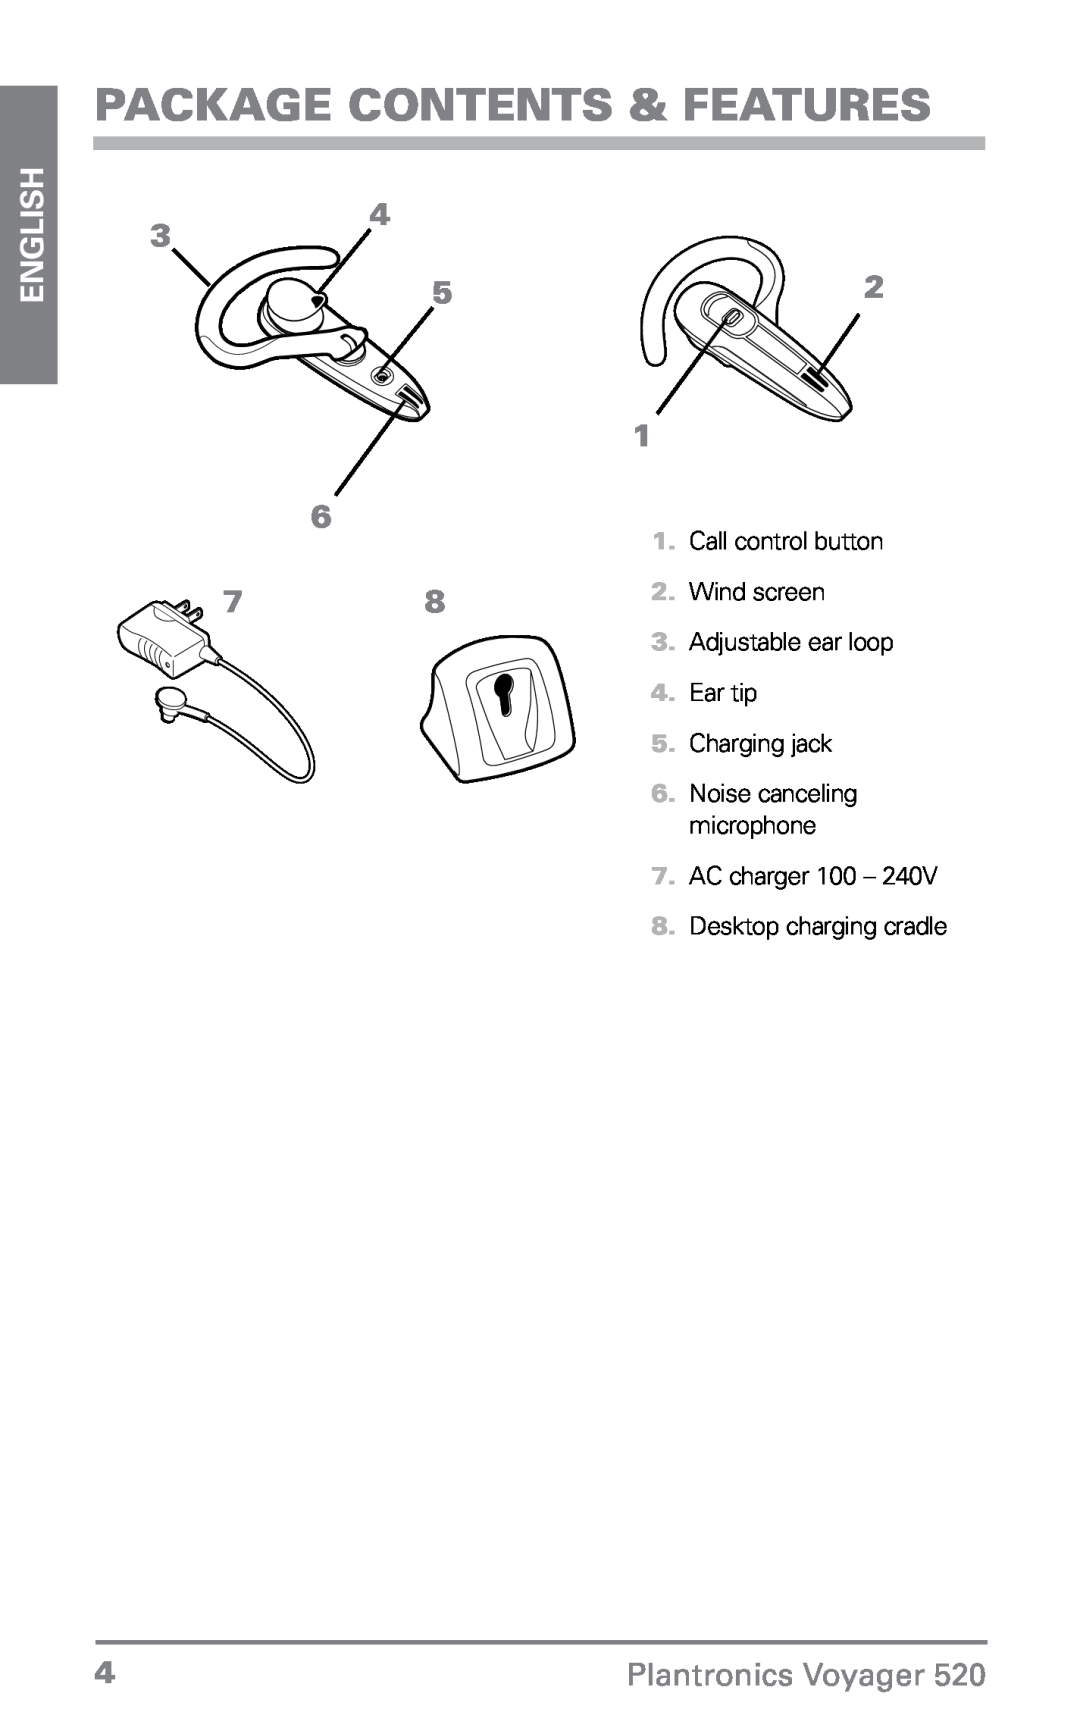 Plantronics 520 manual Package Contents & Features, English, Plantronics Voyager 